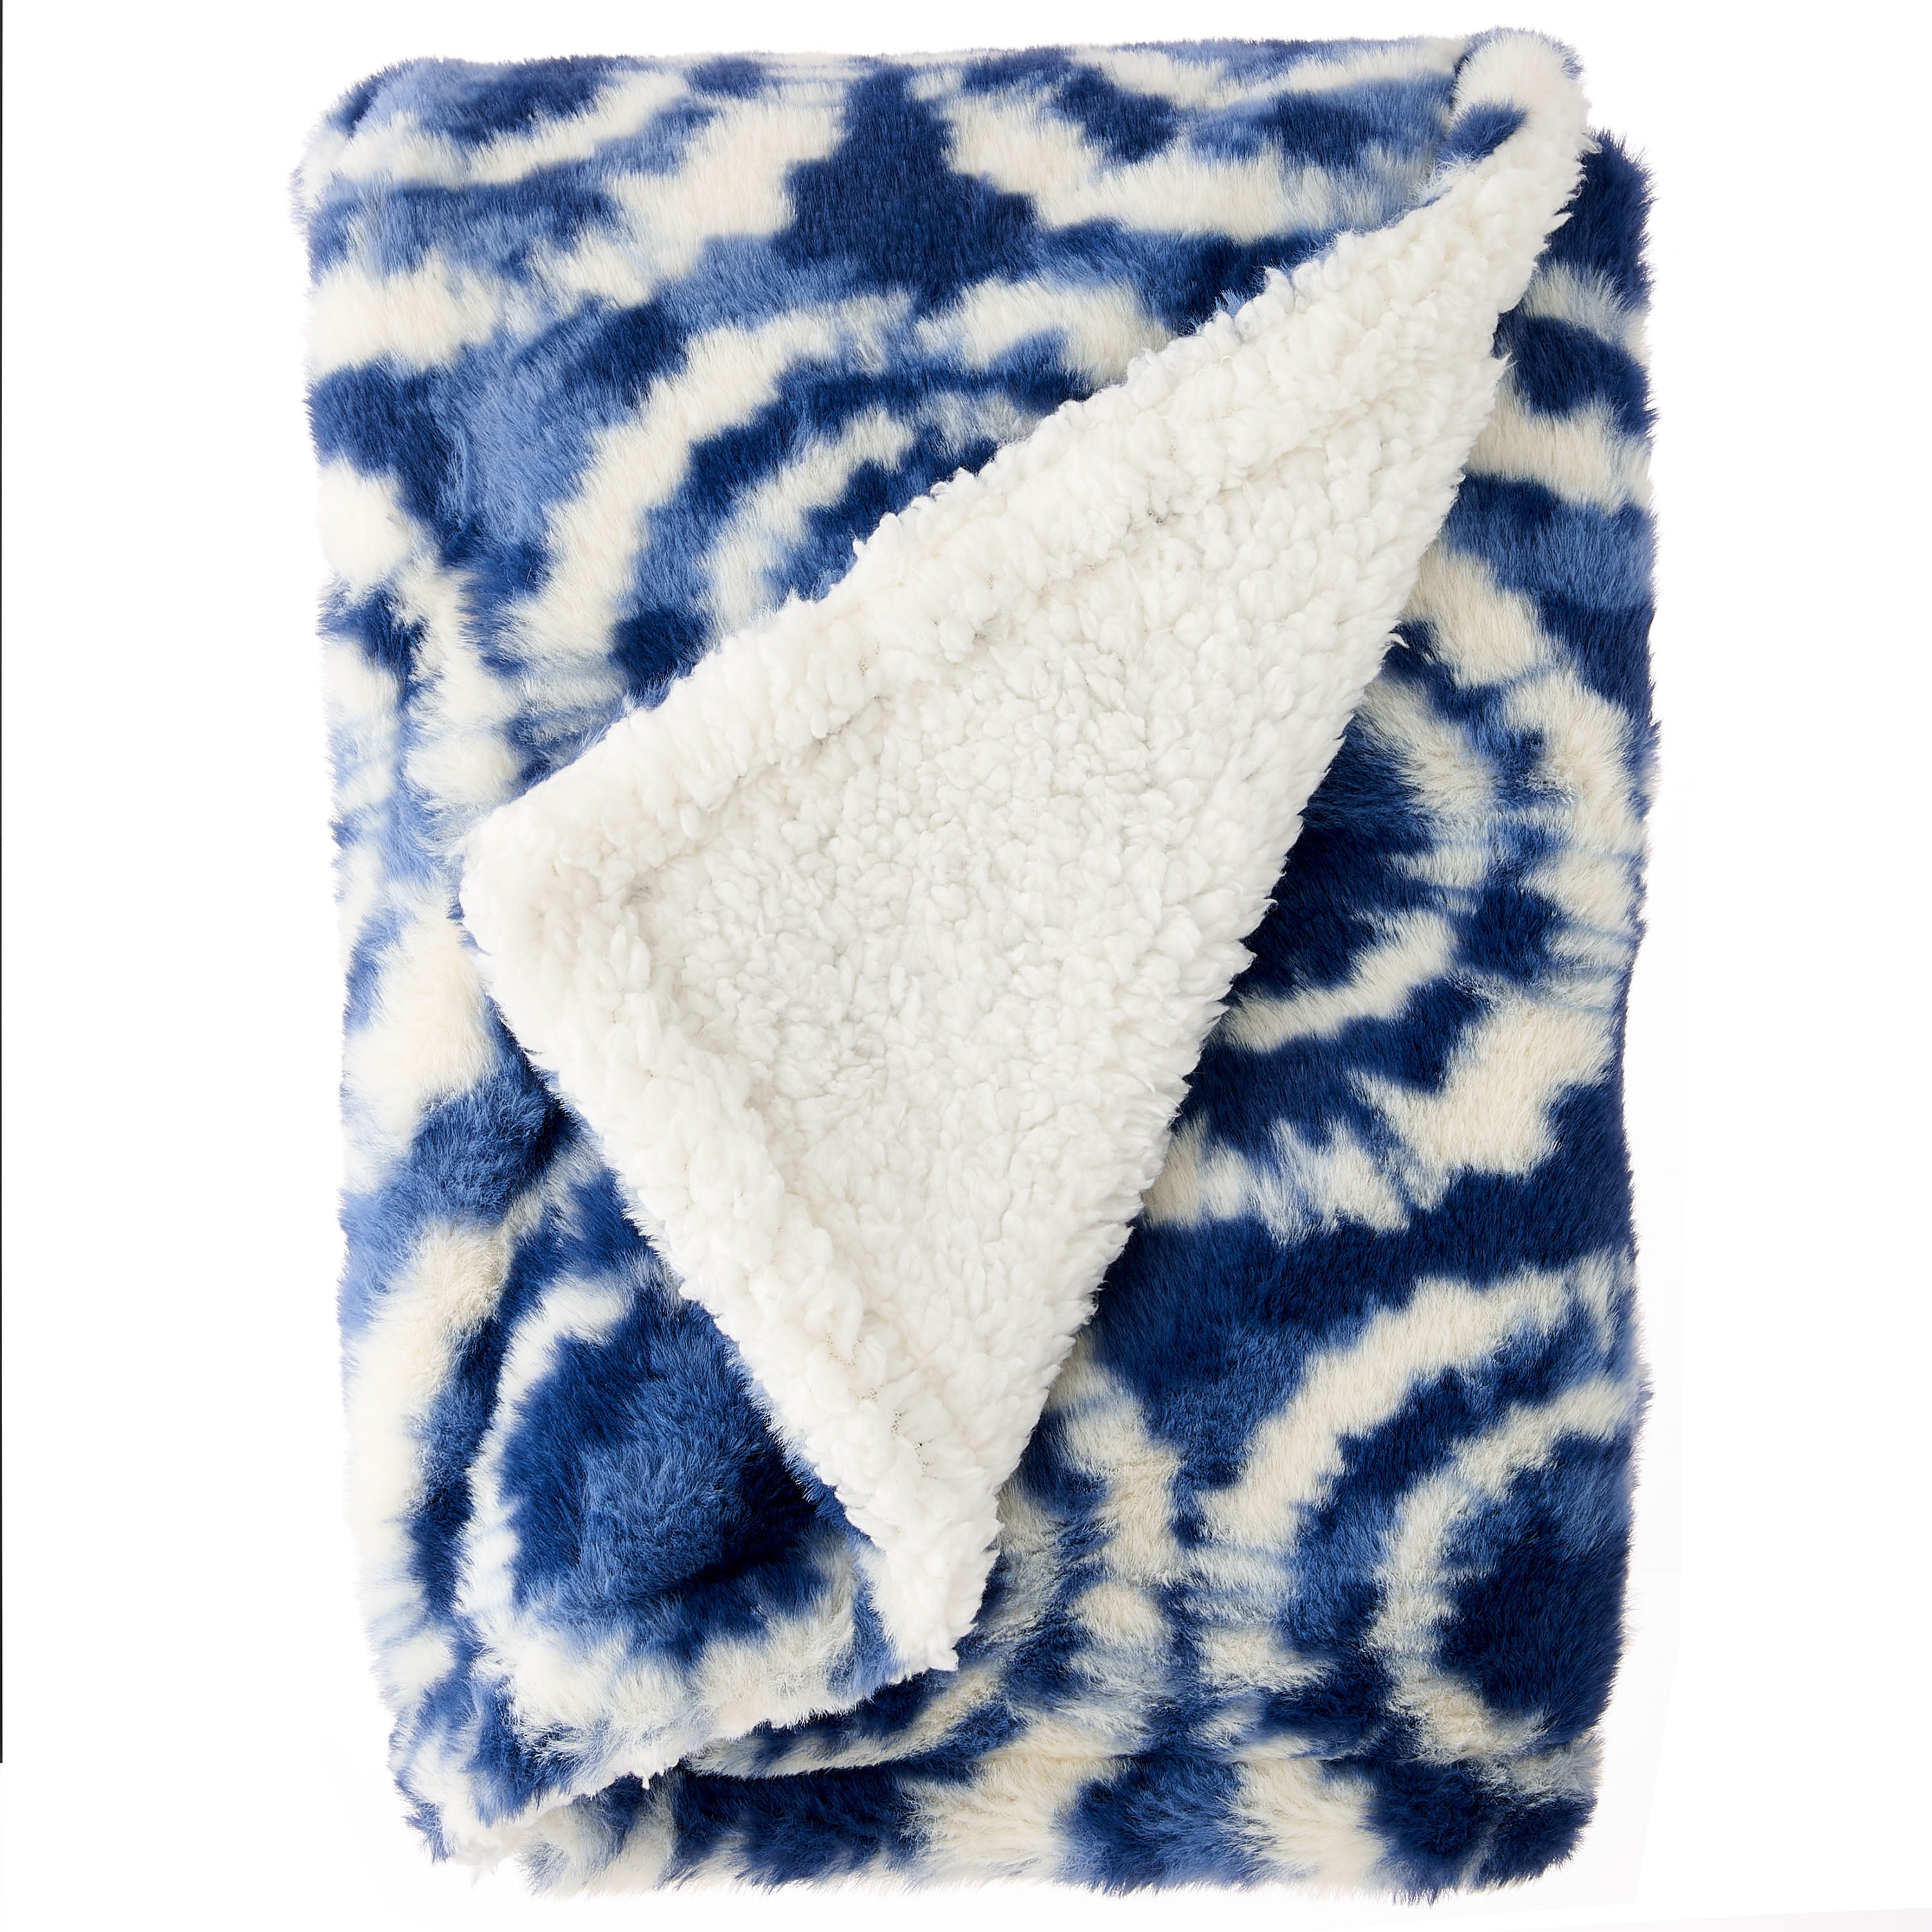 Parent's Choice Plush Blue Tie Dye Blanket with Faux Sherpa Lining for Toddler, 30" x 40"